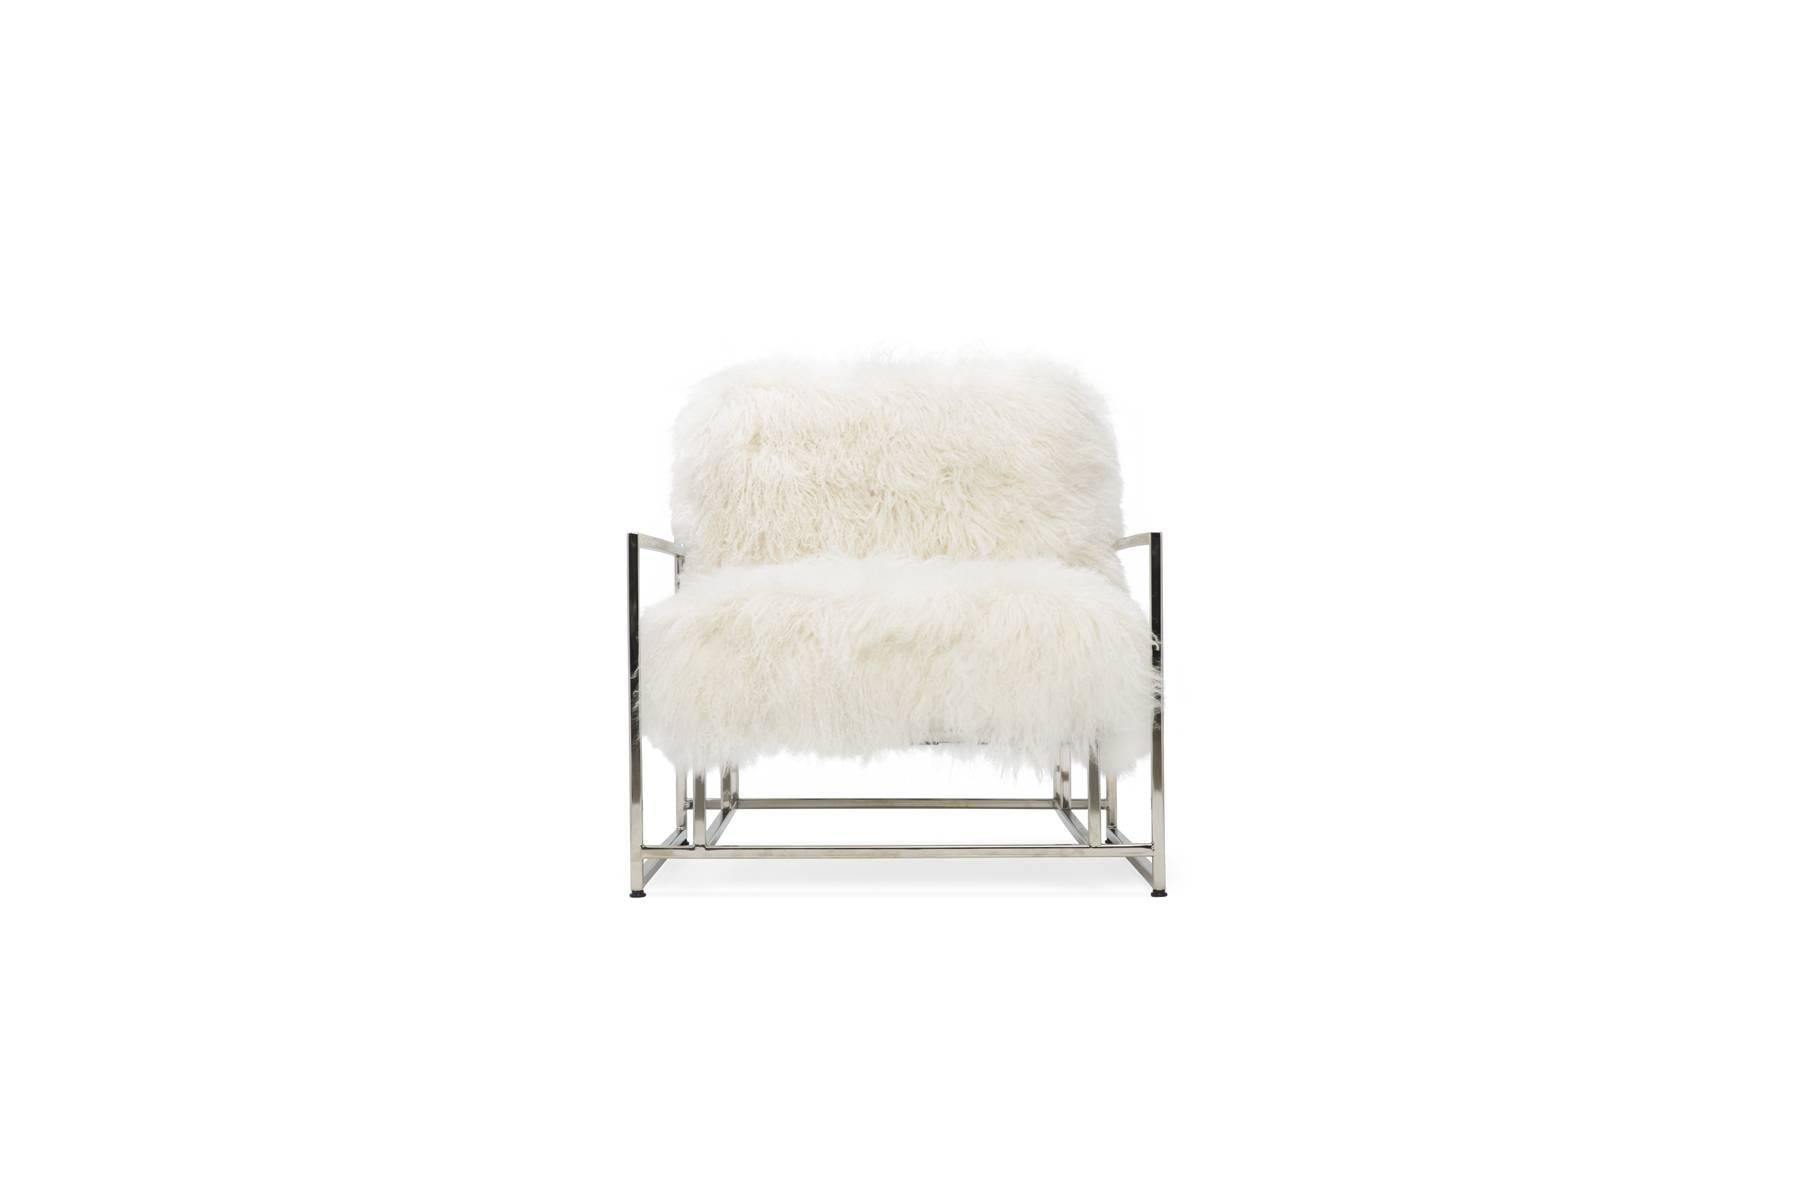 This ultra luxurious version of The Inheritance Collection Armchair has super soft white Mongolian sheepskin upholstery, black webbing and leather belts, and a polished nickel frame finish. Ottoman is sold separately, inquire within.

This item is